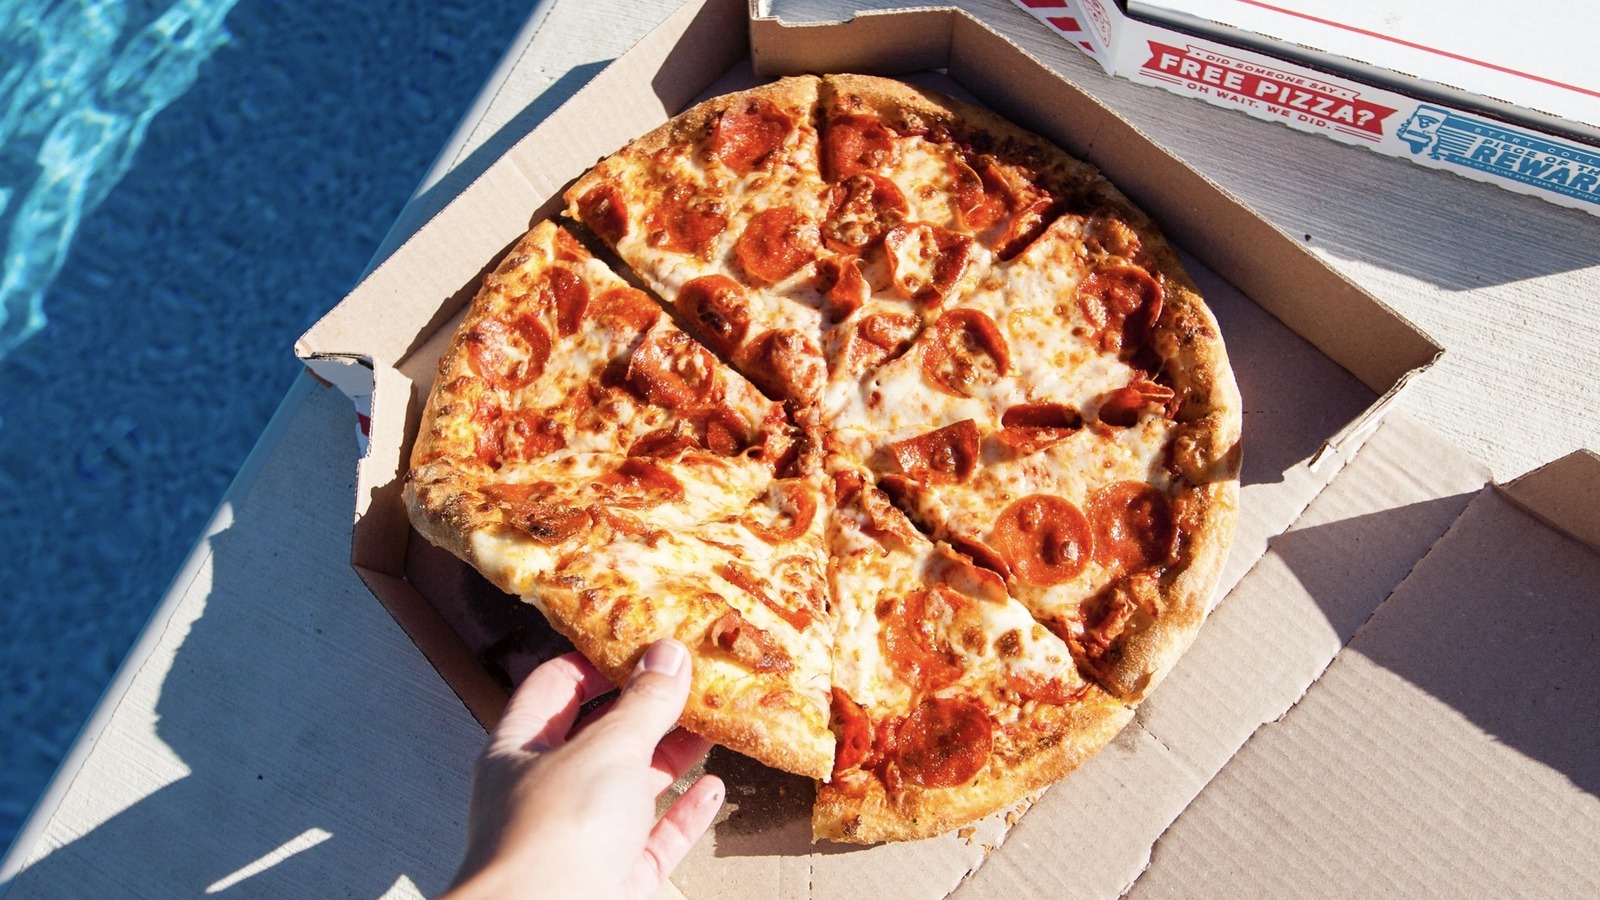 Domino's Pizza Delivery: Fast, Fresh, and Delivered to Your Door